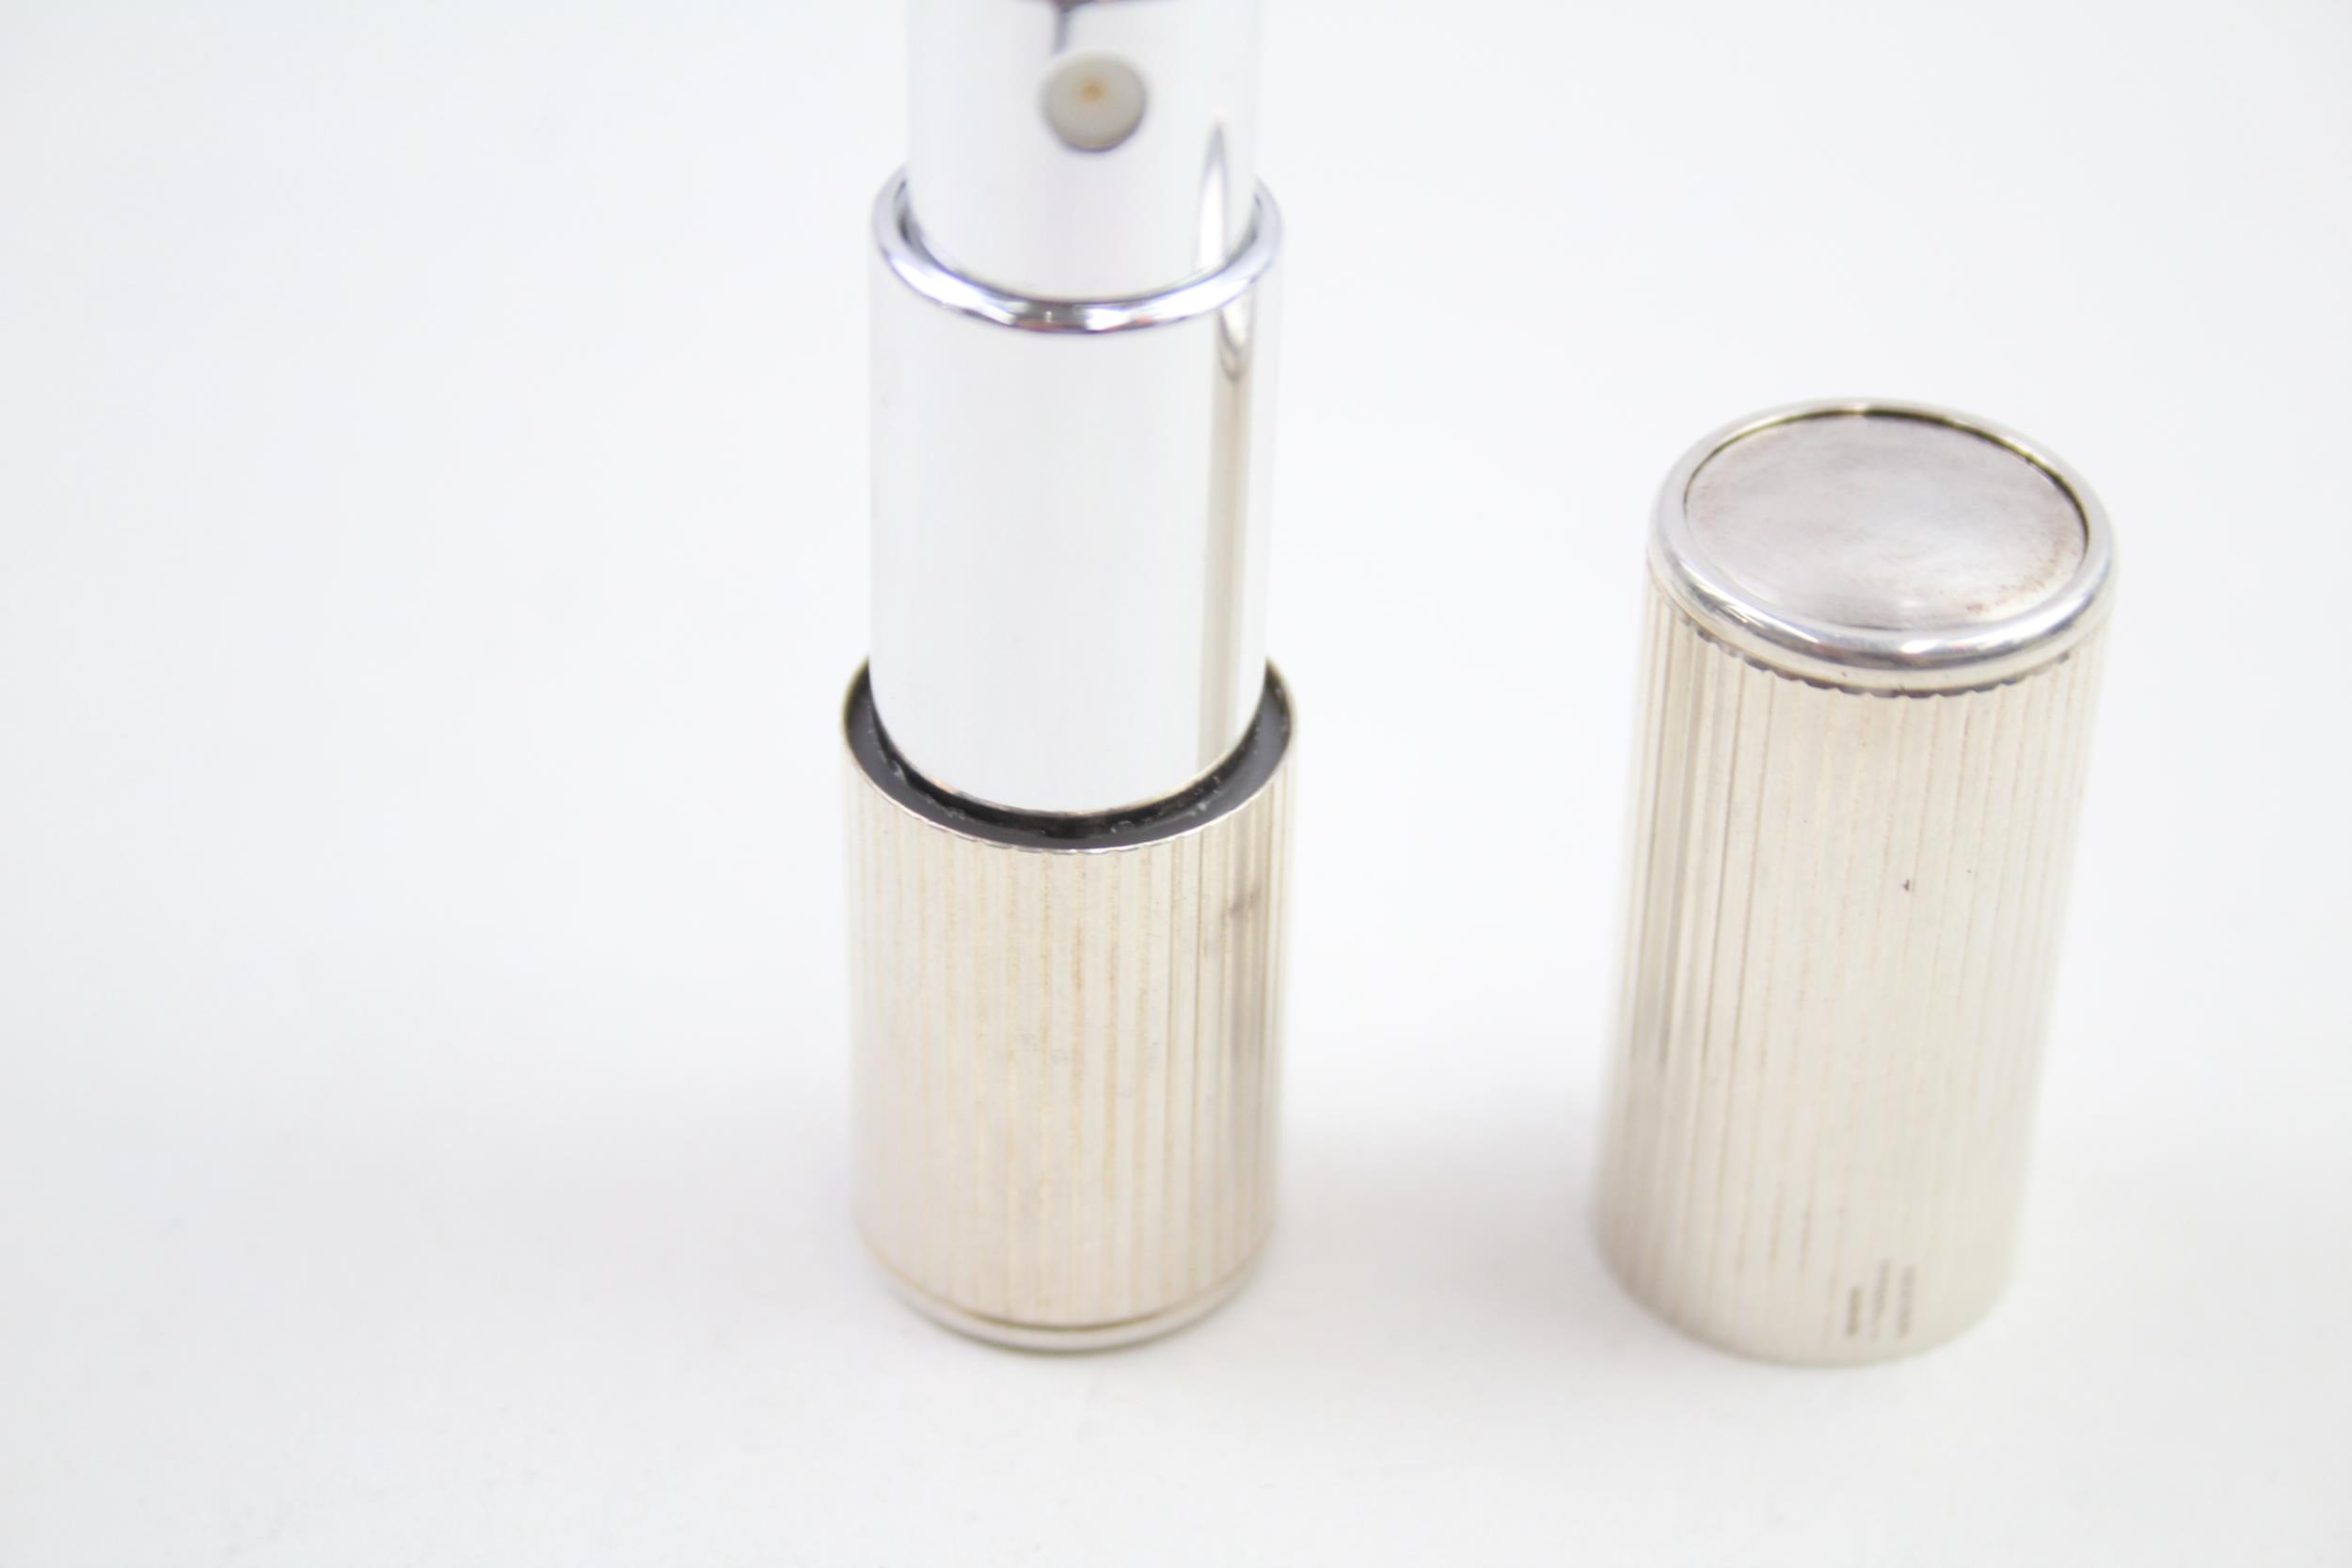 TIFFANY & CO. Stamped .925 Sterling Silver Perfume Atomizer / Bottle (27g) // Length - 6.8cm In - Image 3 of 6